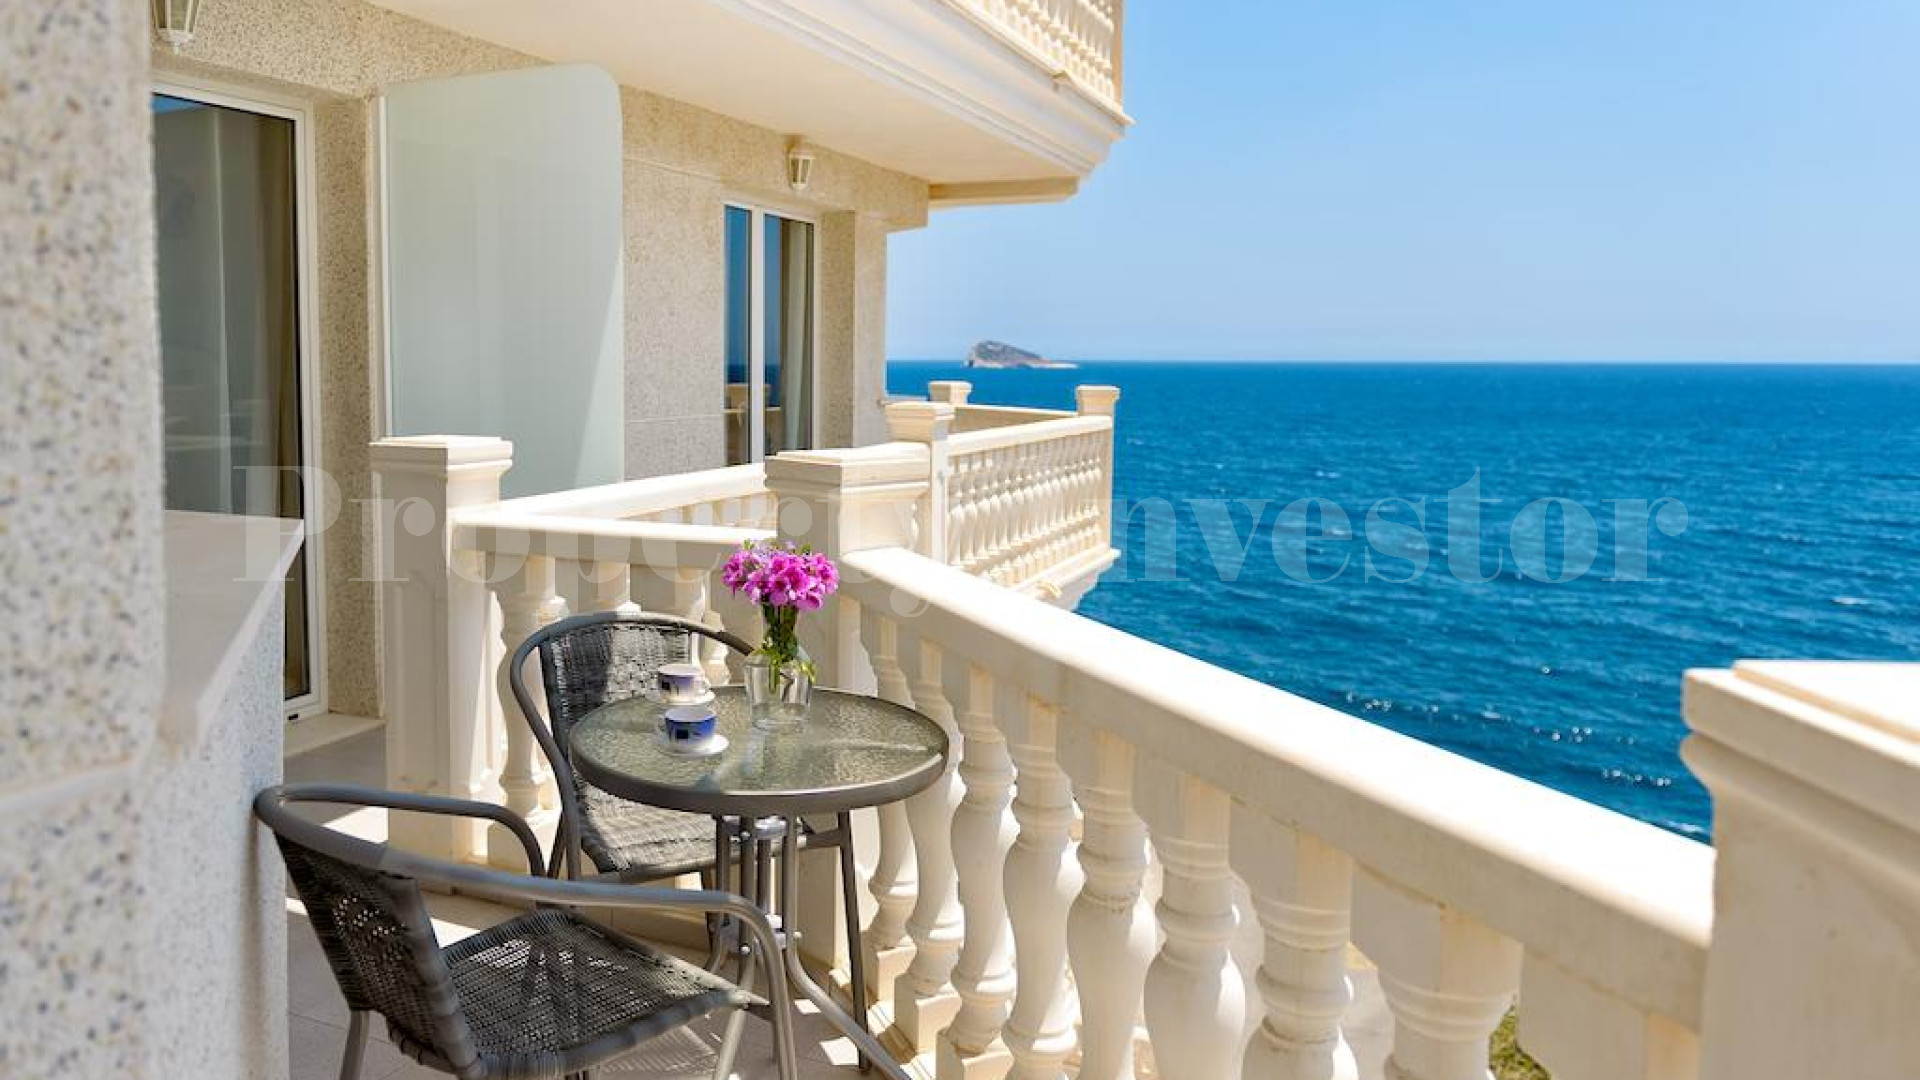 Stylish 11 Apartment Apart-Hotel with Amazing Panoramic Sea Views for Sale in Benidorm, Spain